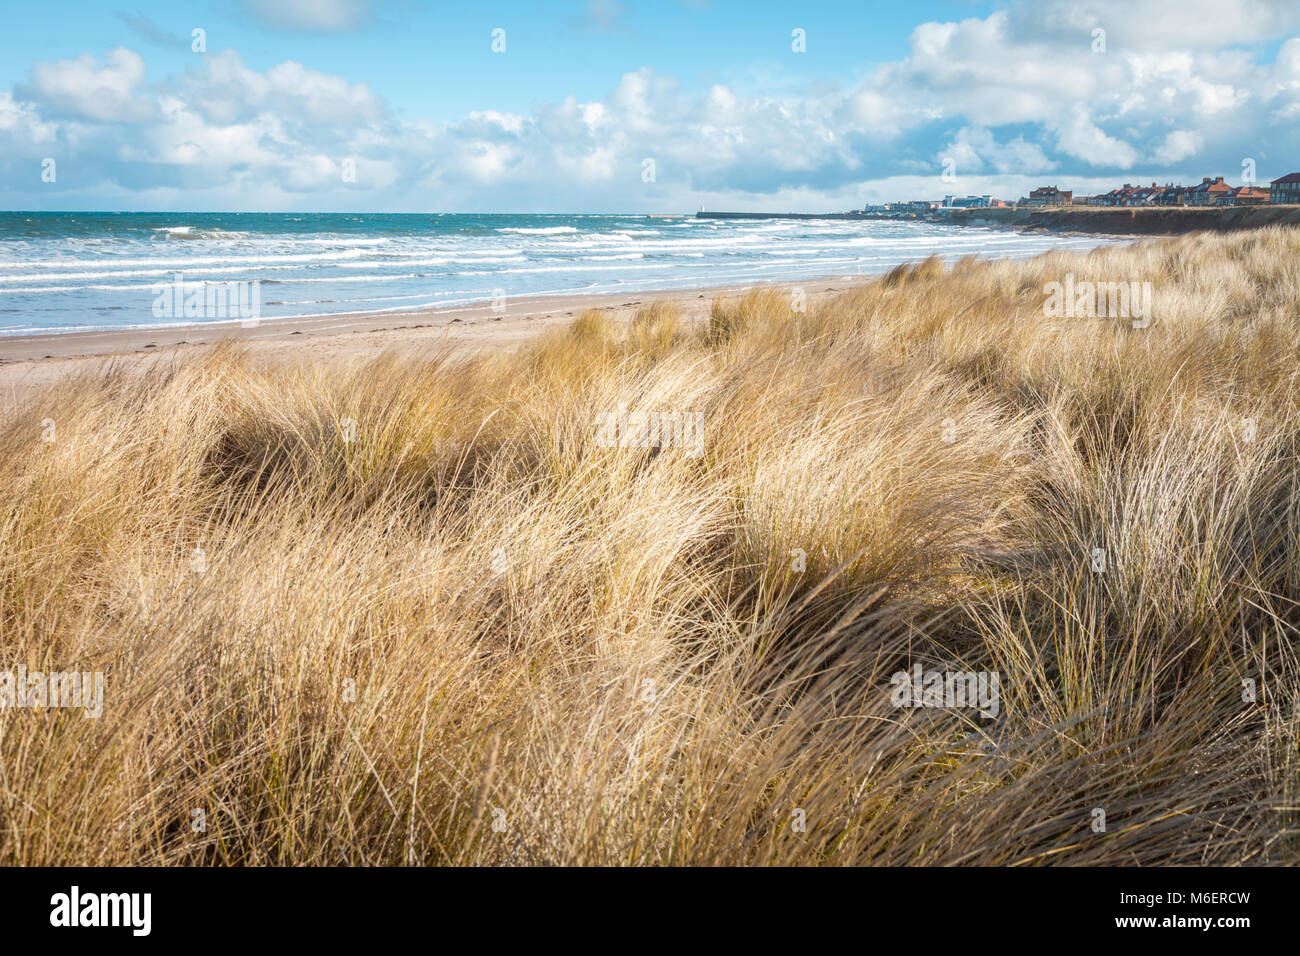 View over the beach from dunes on the Northumberland coast UK Stock Photo